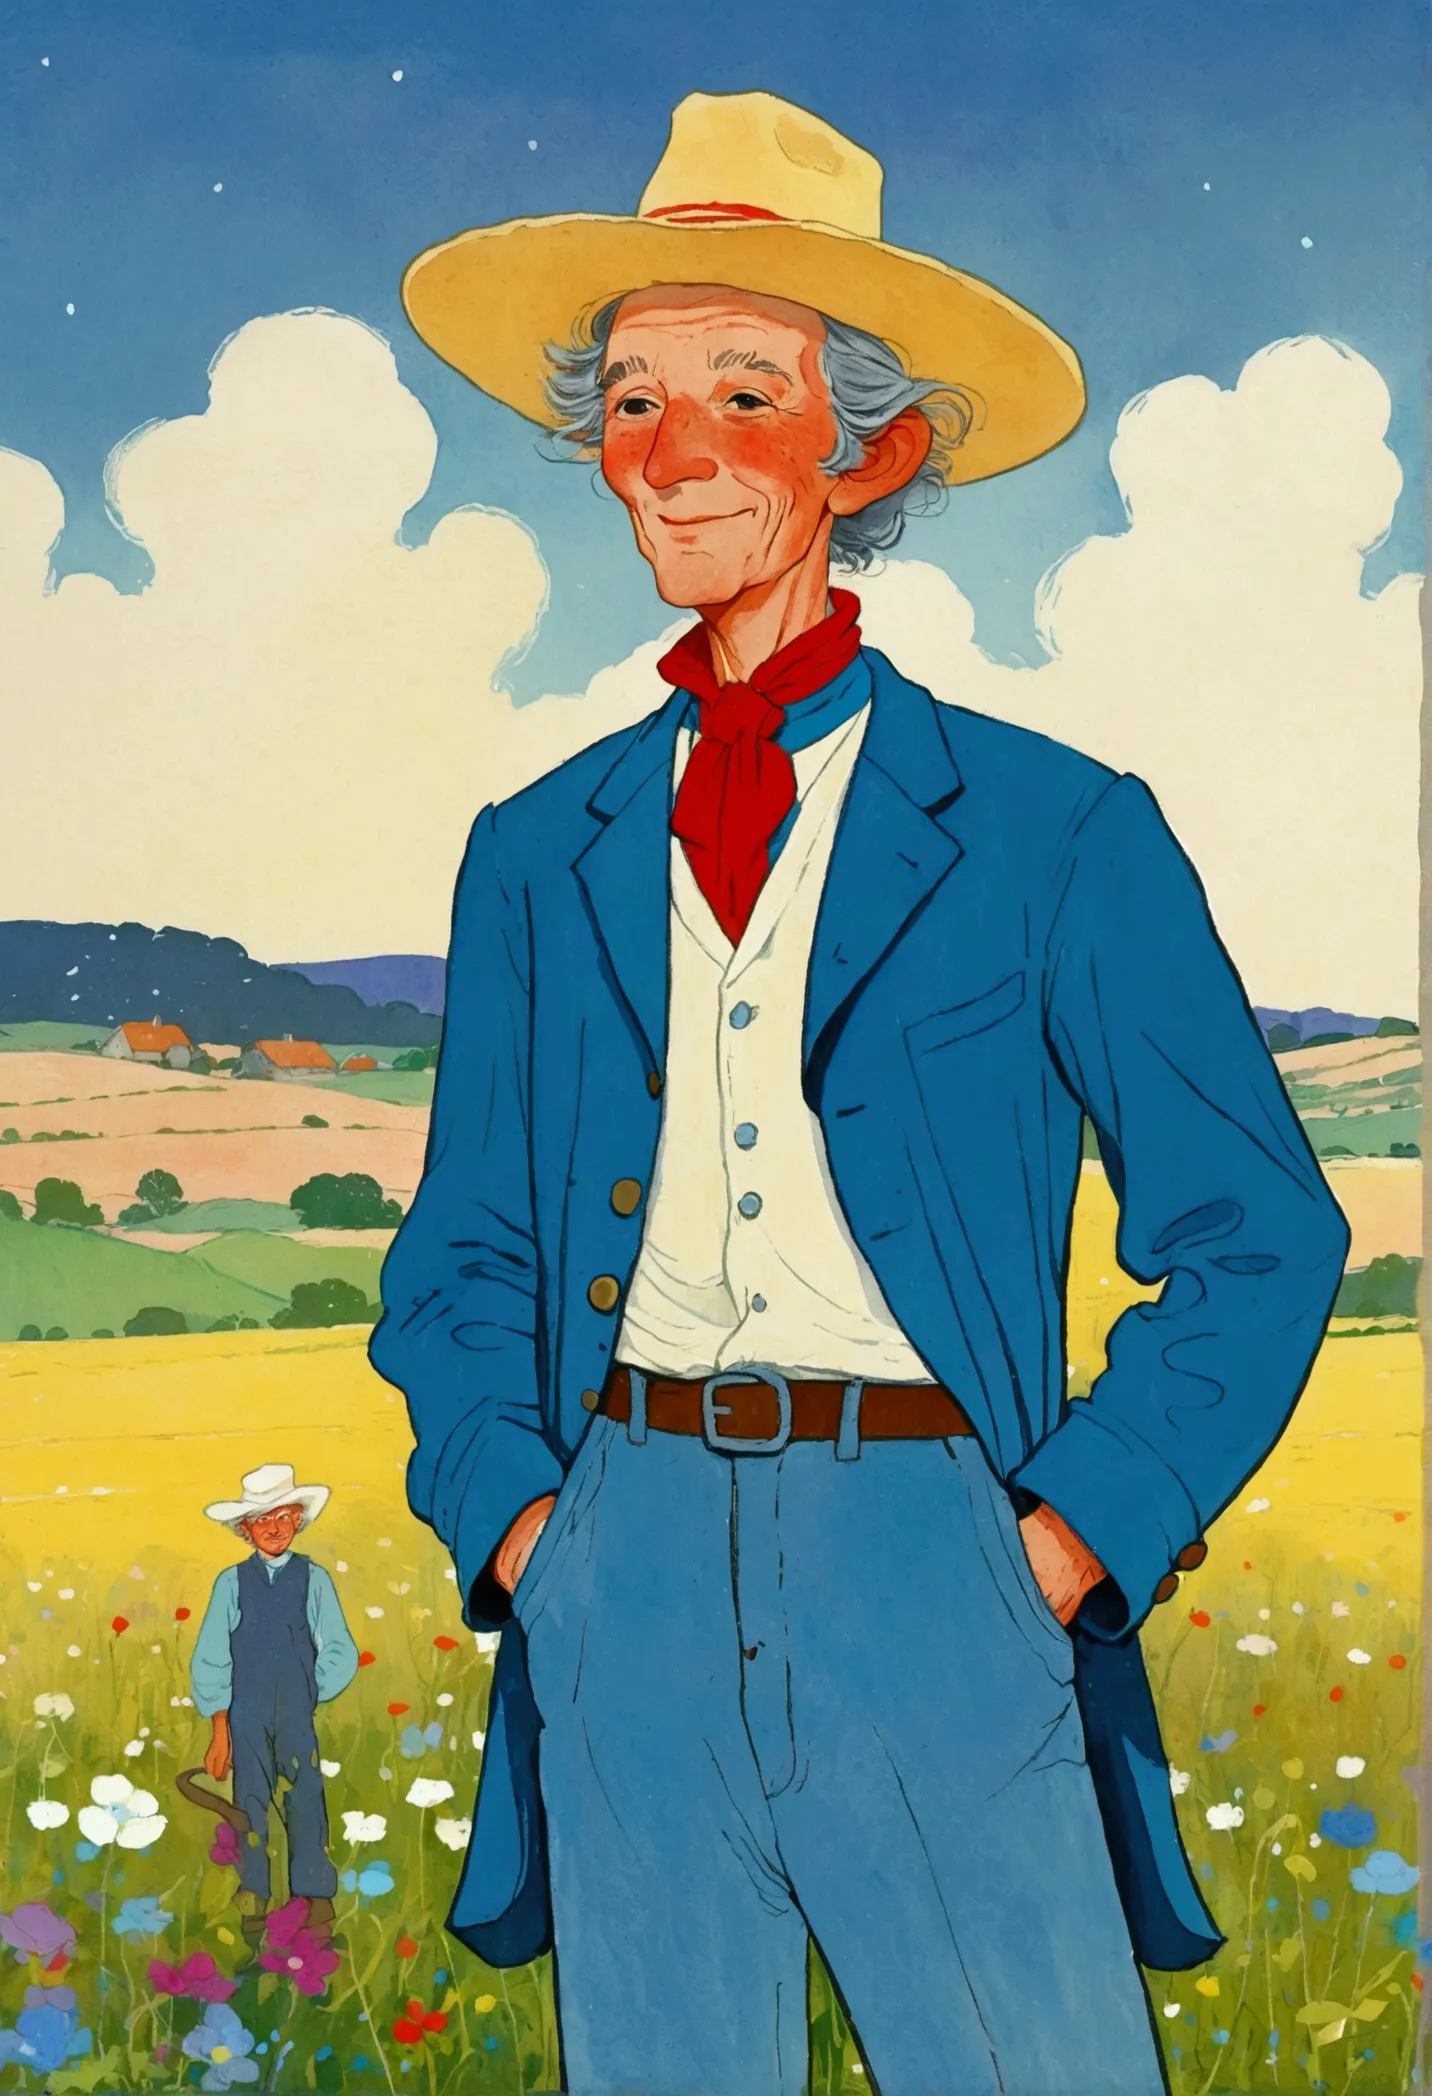 Cartoon of a man wearing standing in a field, Li Renwen&#39;s gouache paintings, flickr, Childish Art, Character with hat, tall ...